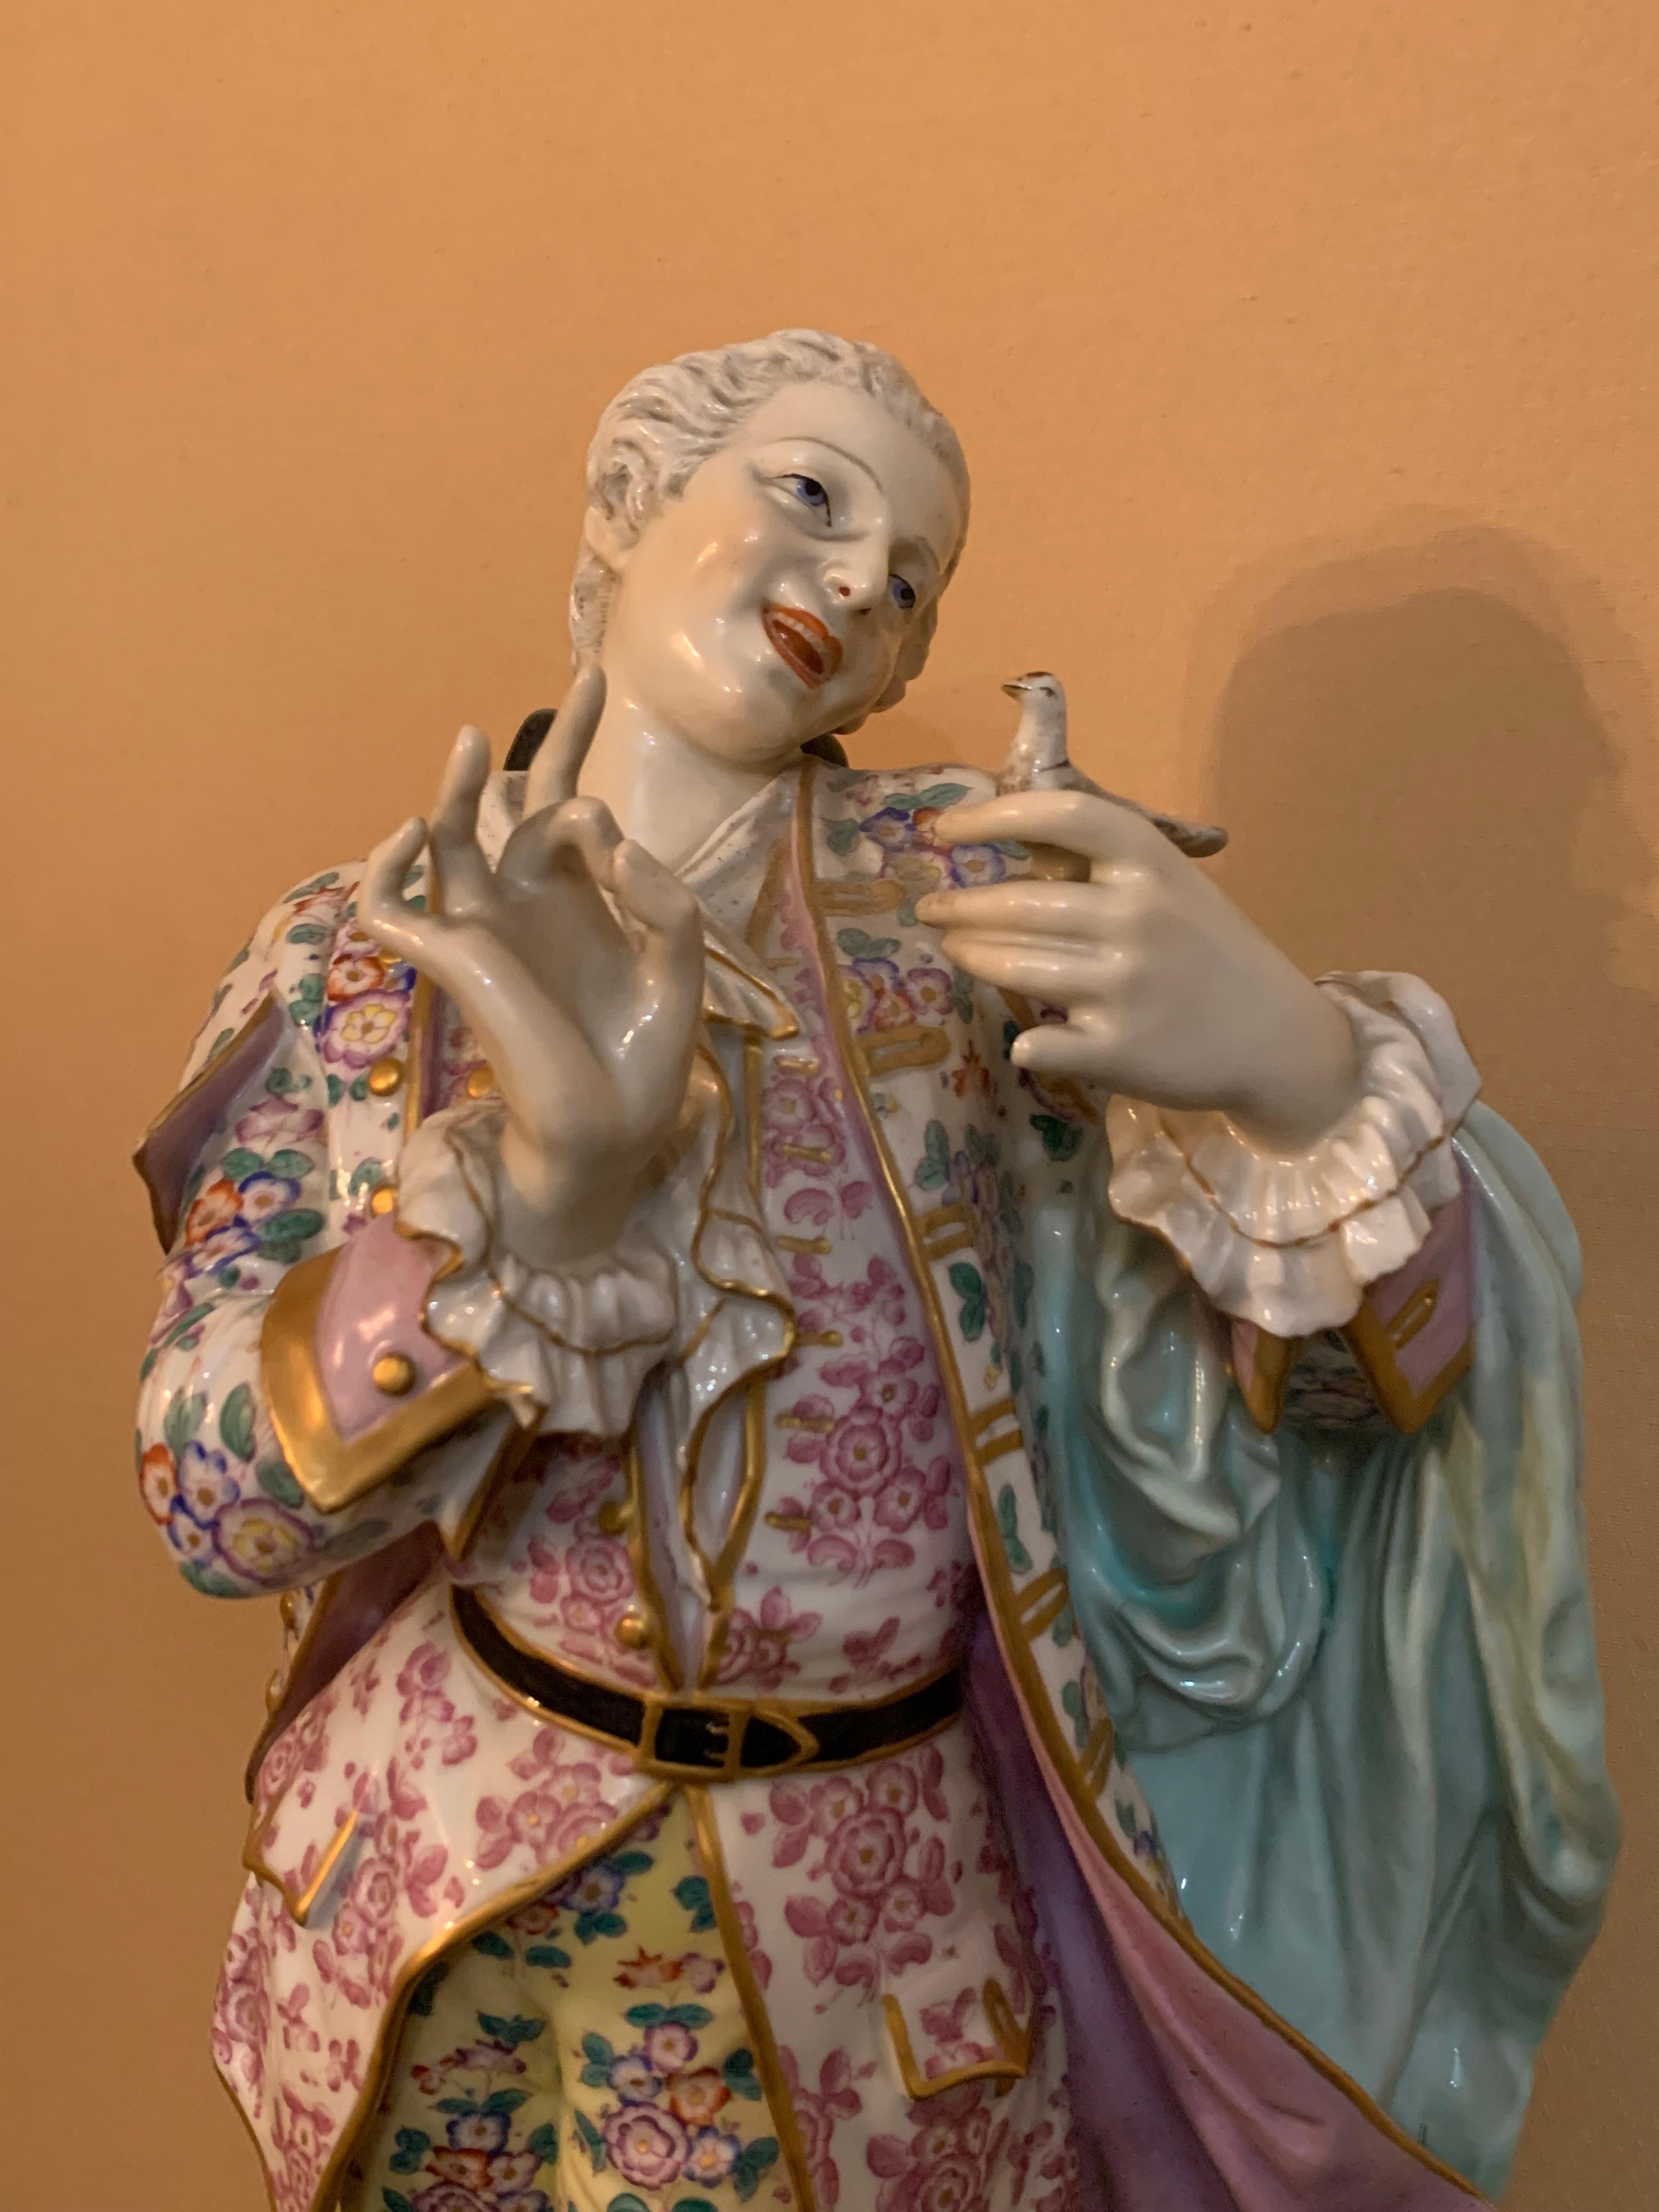 A beautiful large pair of 19th century porcelain figures of lovers. Each figure is beautifuly decorated and hand painted. The gentelman is wearing a nice suite with vibrant colors the woman is wearing a nice dress also with vibrant colors. 
Have a